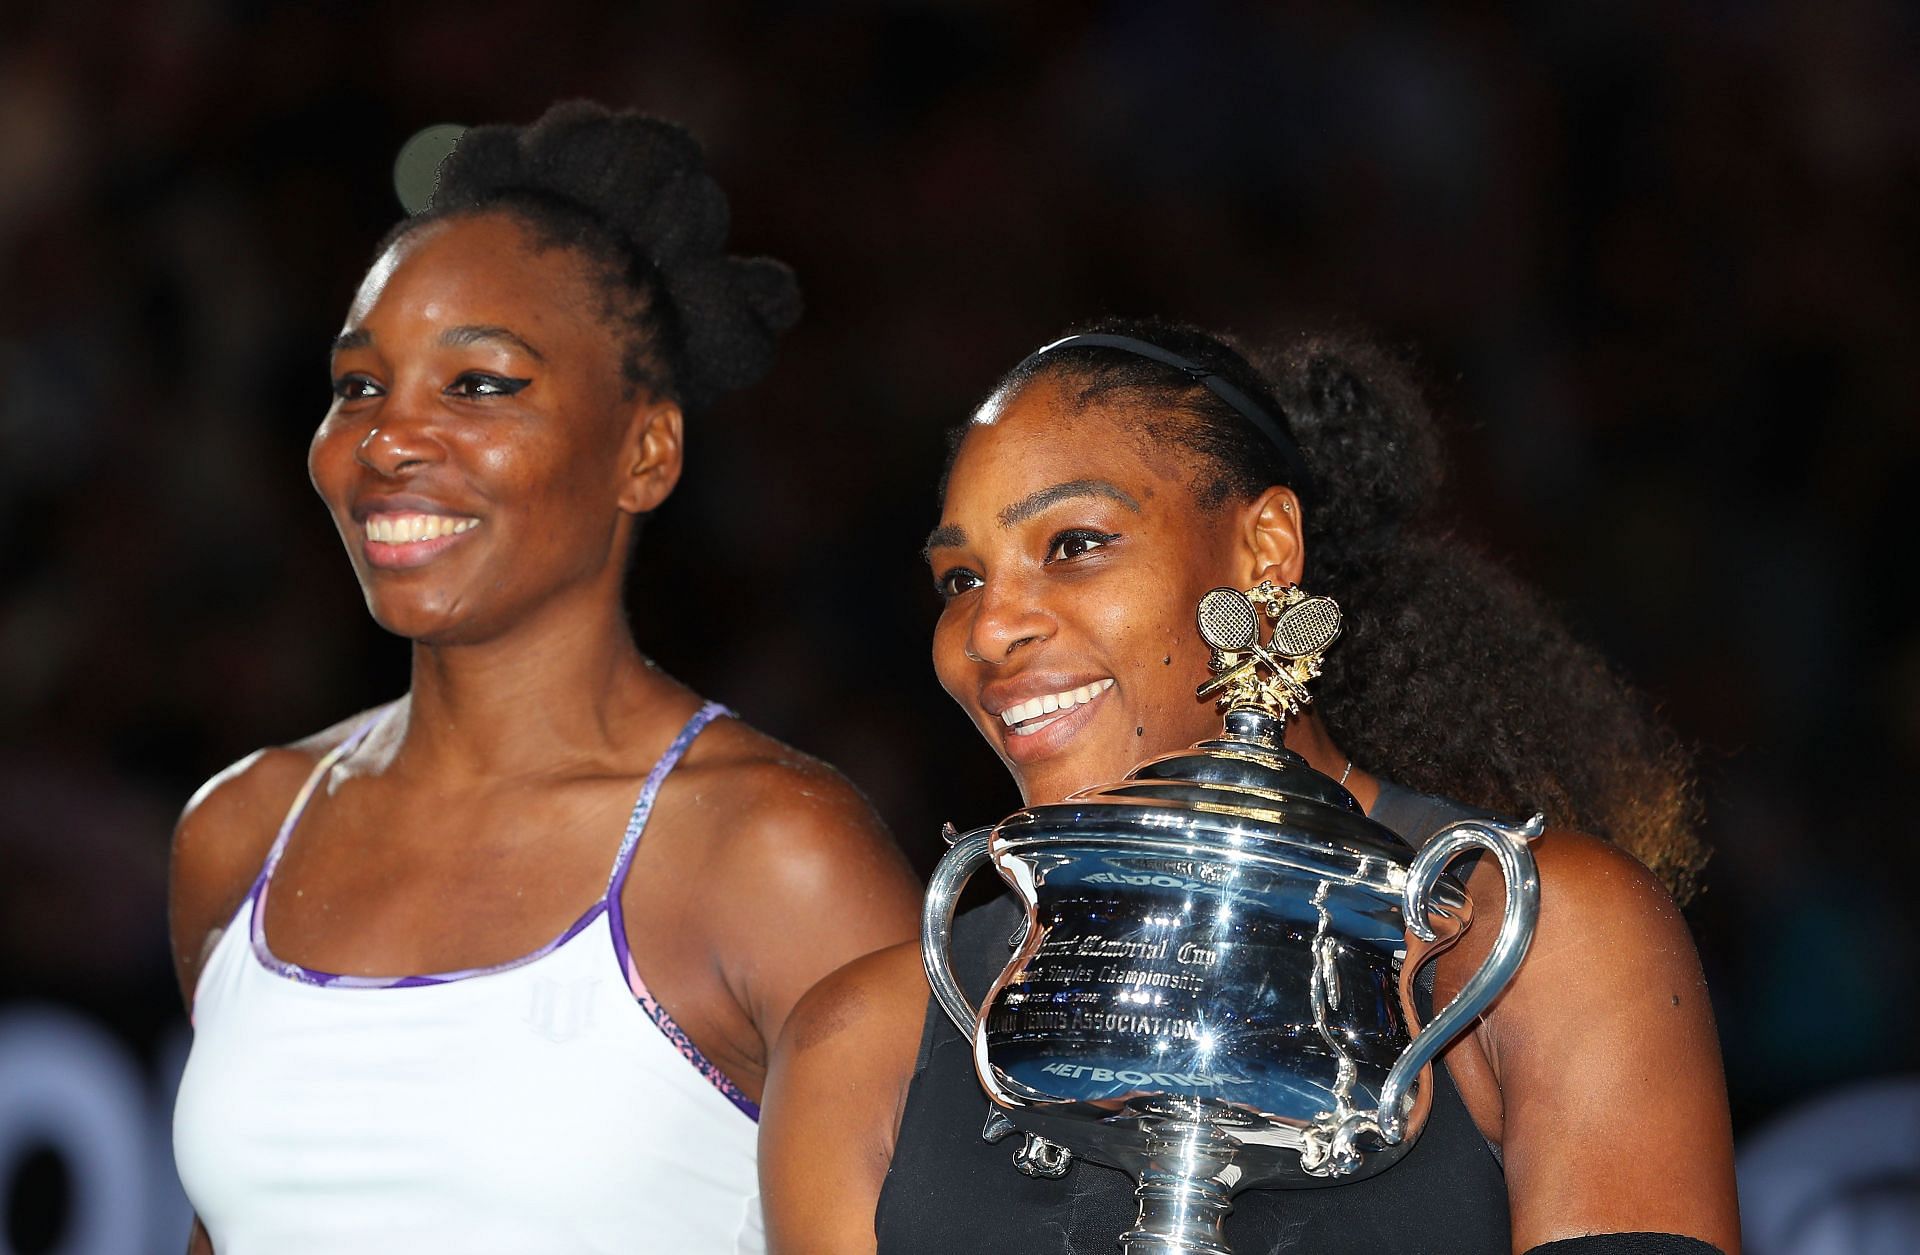 Venus (L) and Serena Williams pose with the trophy ahead of the 2017 Australian Open